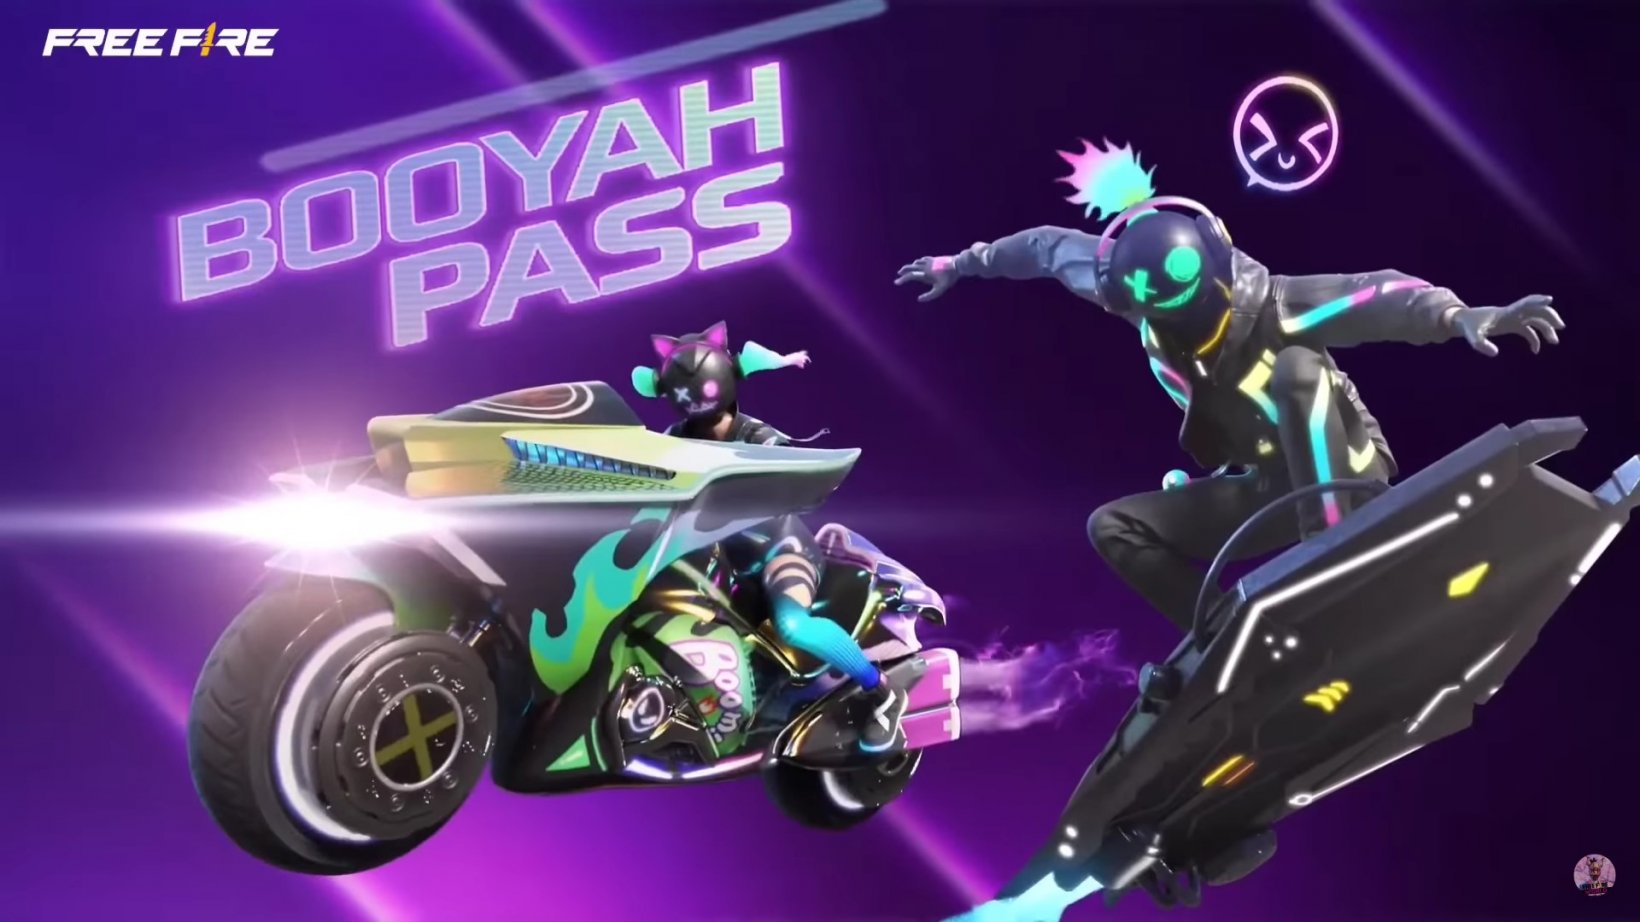 Free Fire is replacing the Elite Pass with the Booyah Pass in the new year